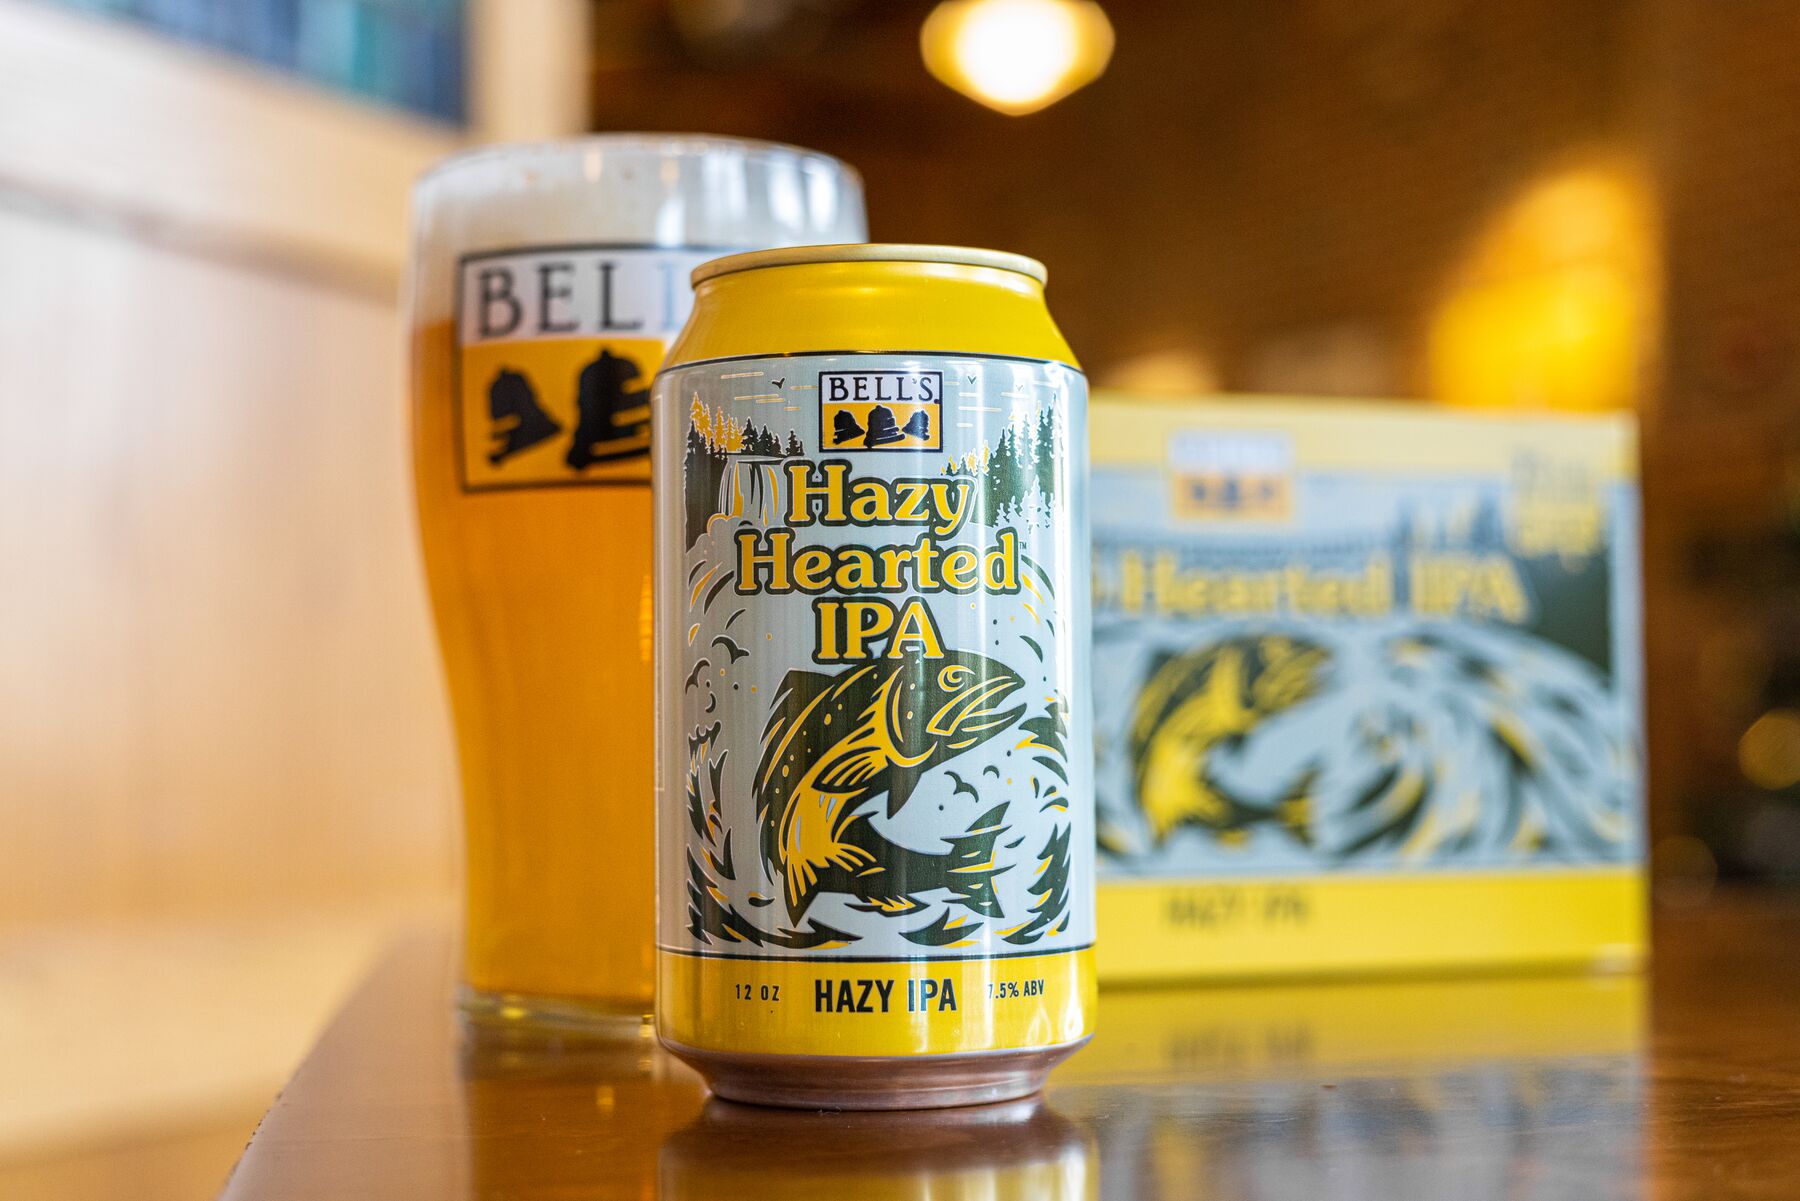 A can of Bell's Hazy Hearted IPA, in front of a pint glass with the Bell’s logo and a bright gold beer in it. The cans feature colorful artwork depicting a fish jumping out of water. The cans sit on a reflective surface, with a blurred sign or menu visible in the background. The overall lighting appears warm and inviting, suggesting a cozy bar or brewery setting.